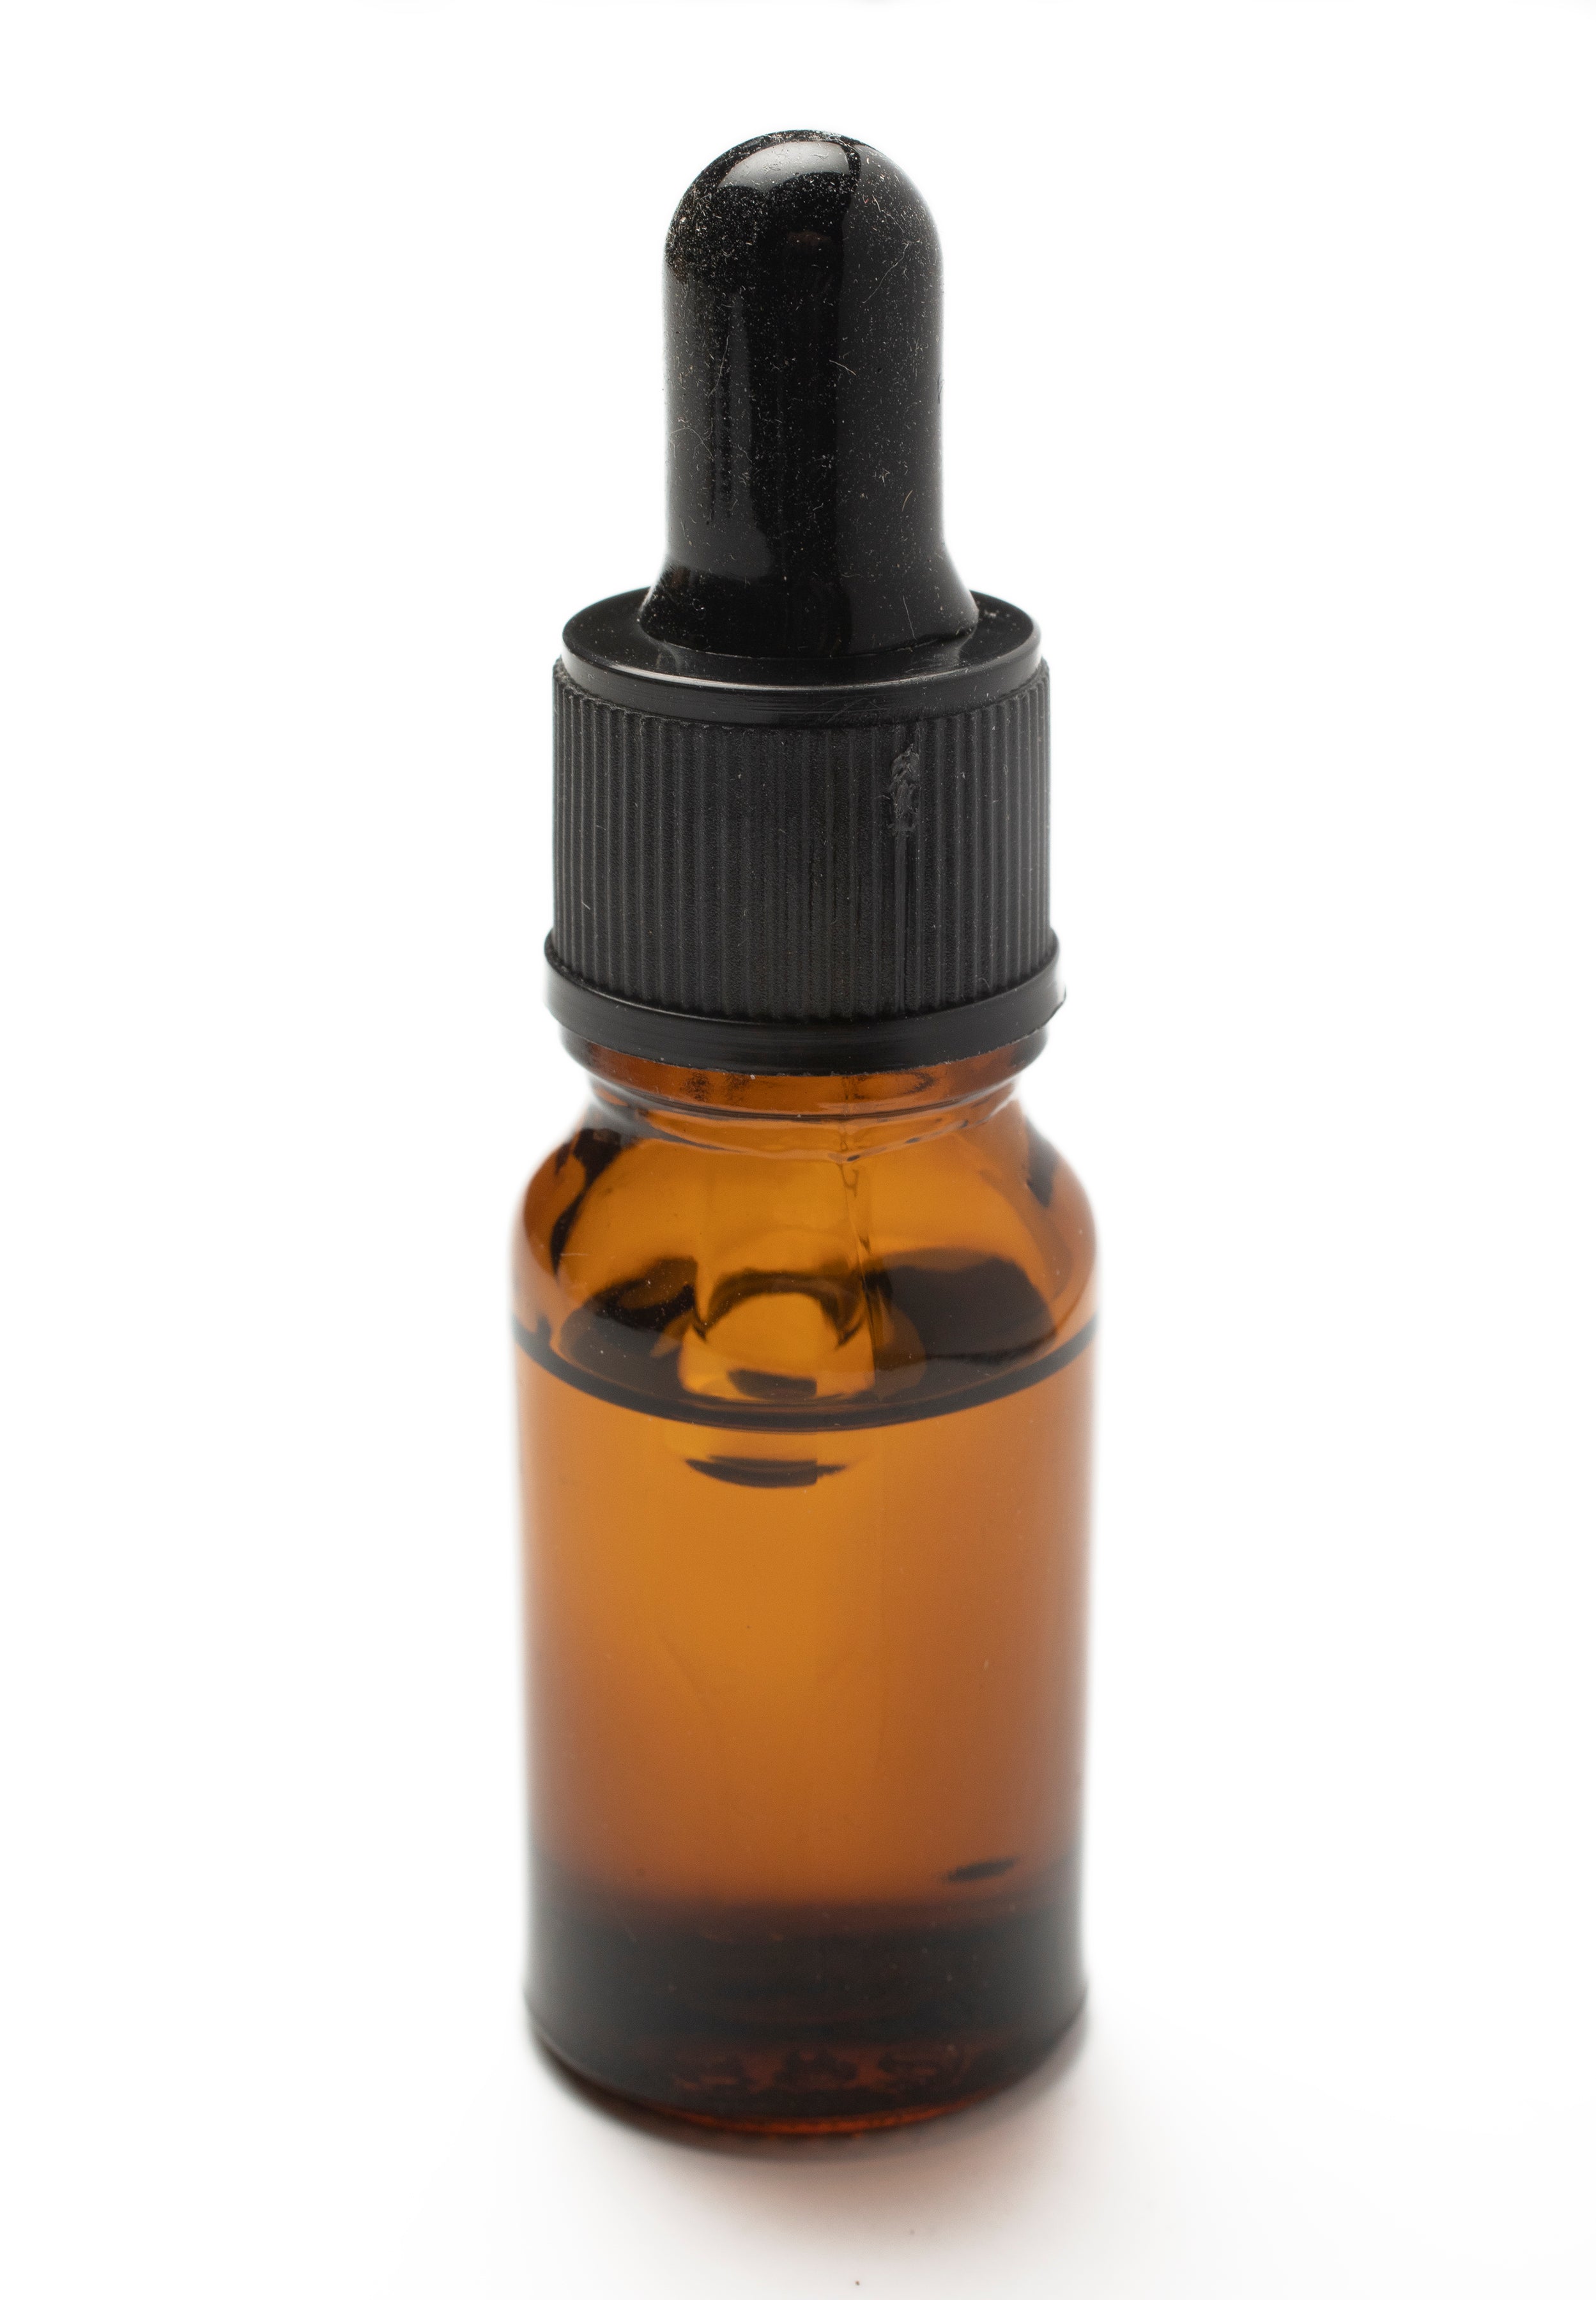 Inhale Mindful Presents’ Clarity essential oil with essence of peppermint while you are in meditation to spark clarity.